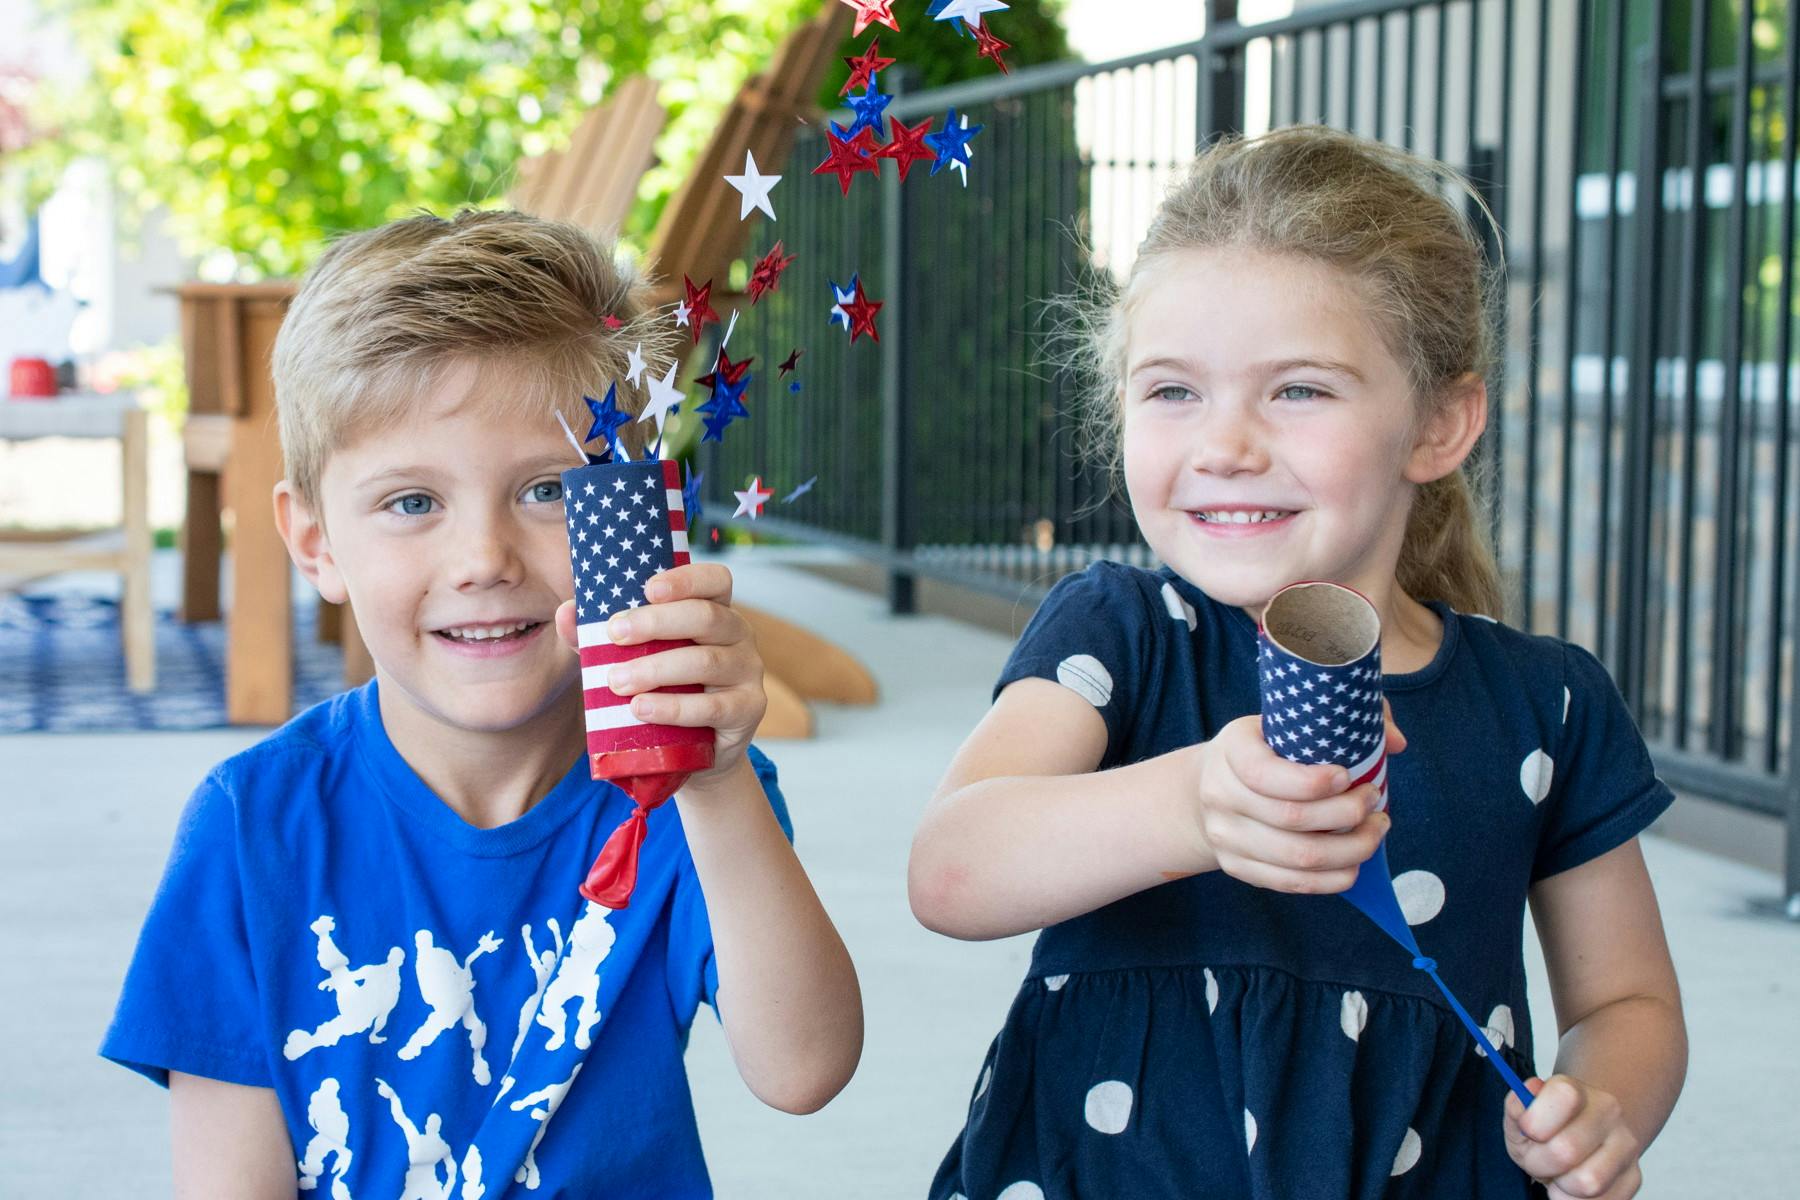 Two children sitting and shooting out confetti from their confetti poppers made with toilet paper rolls, balloons and flags.